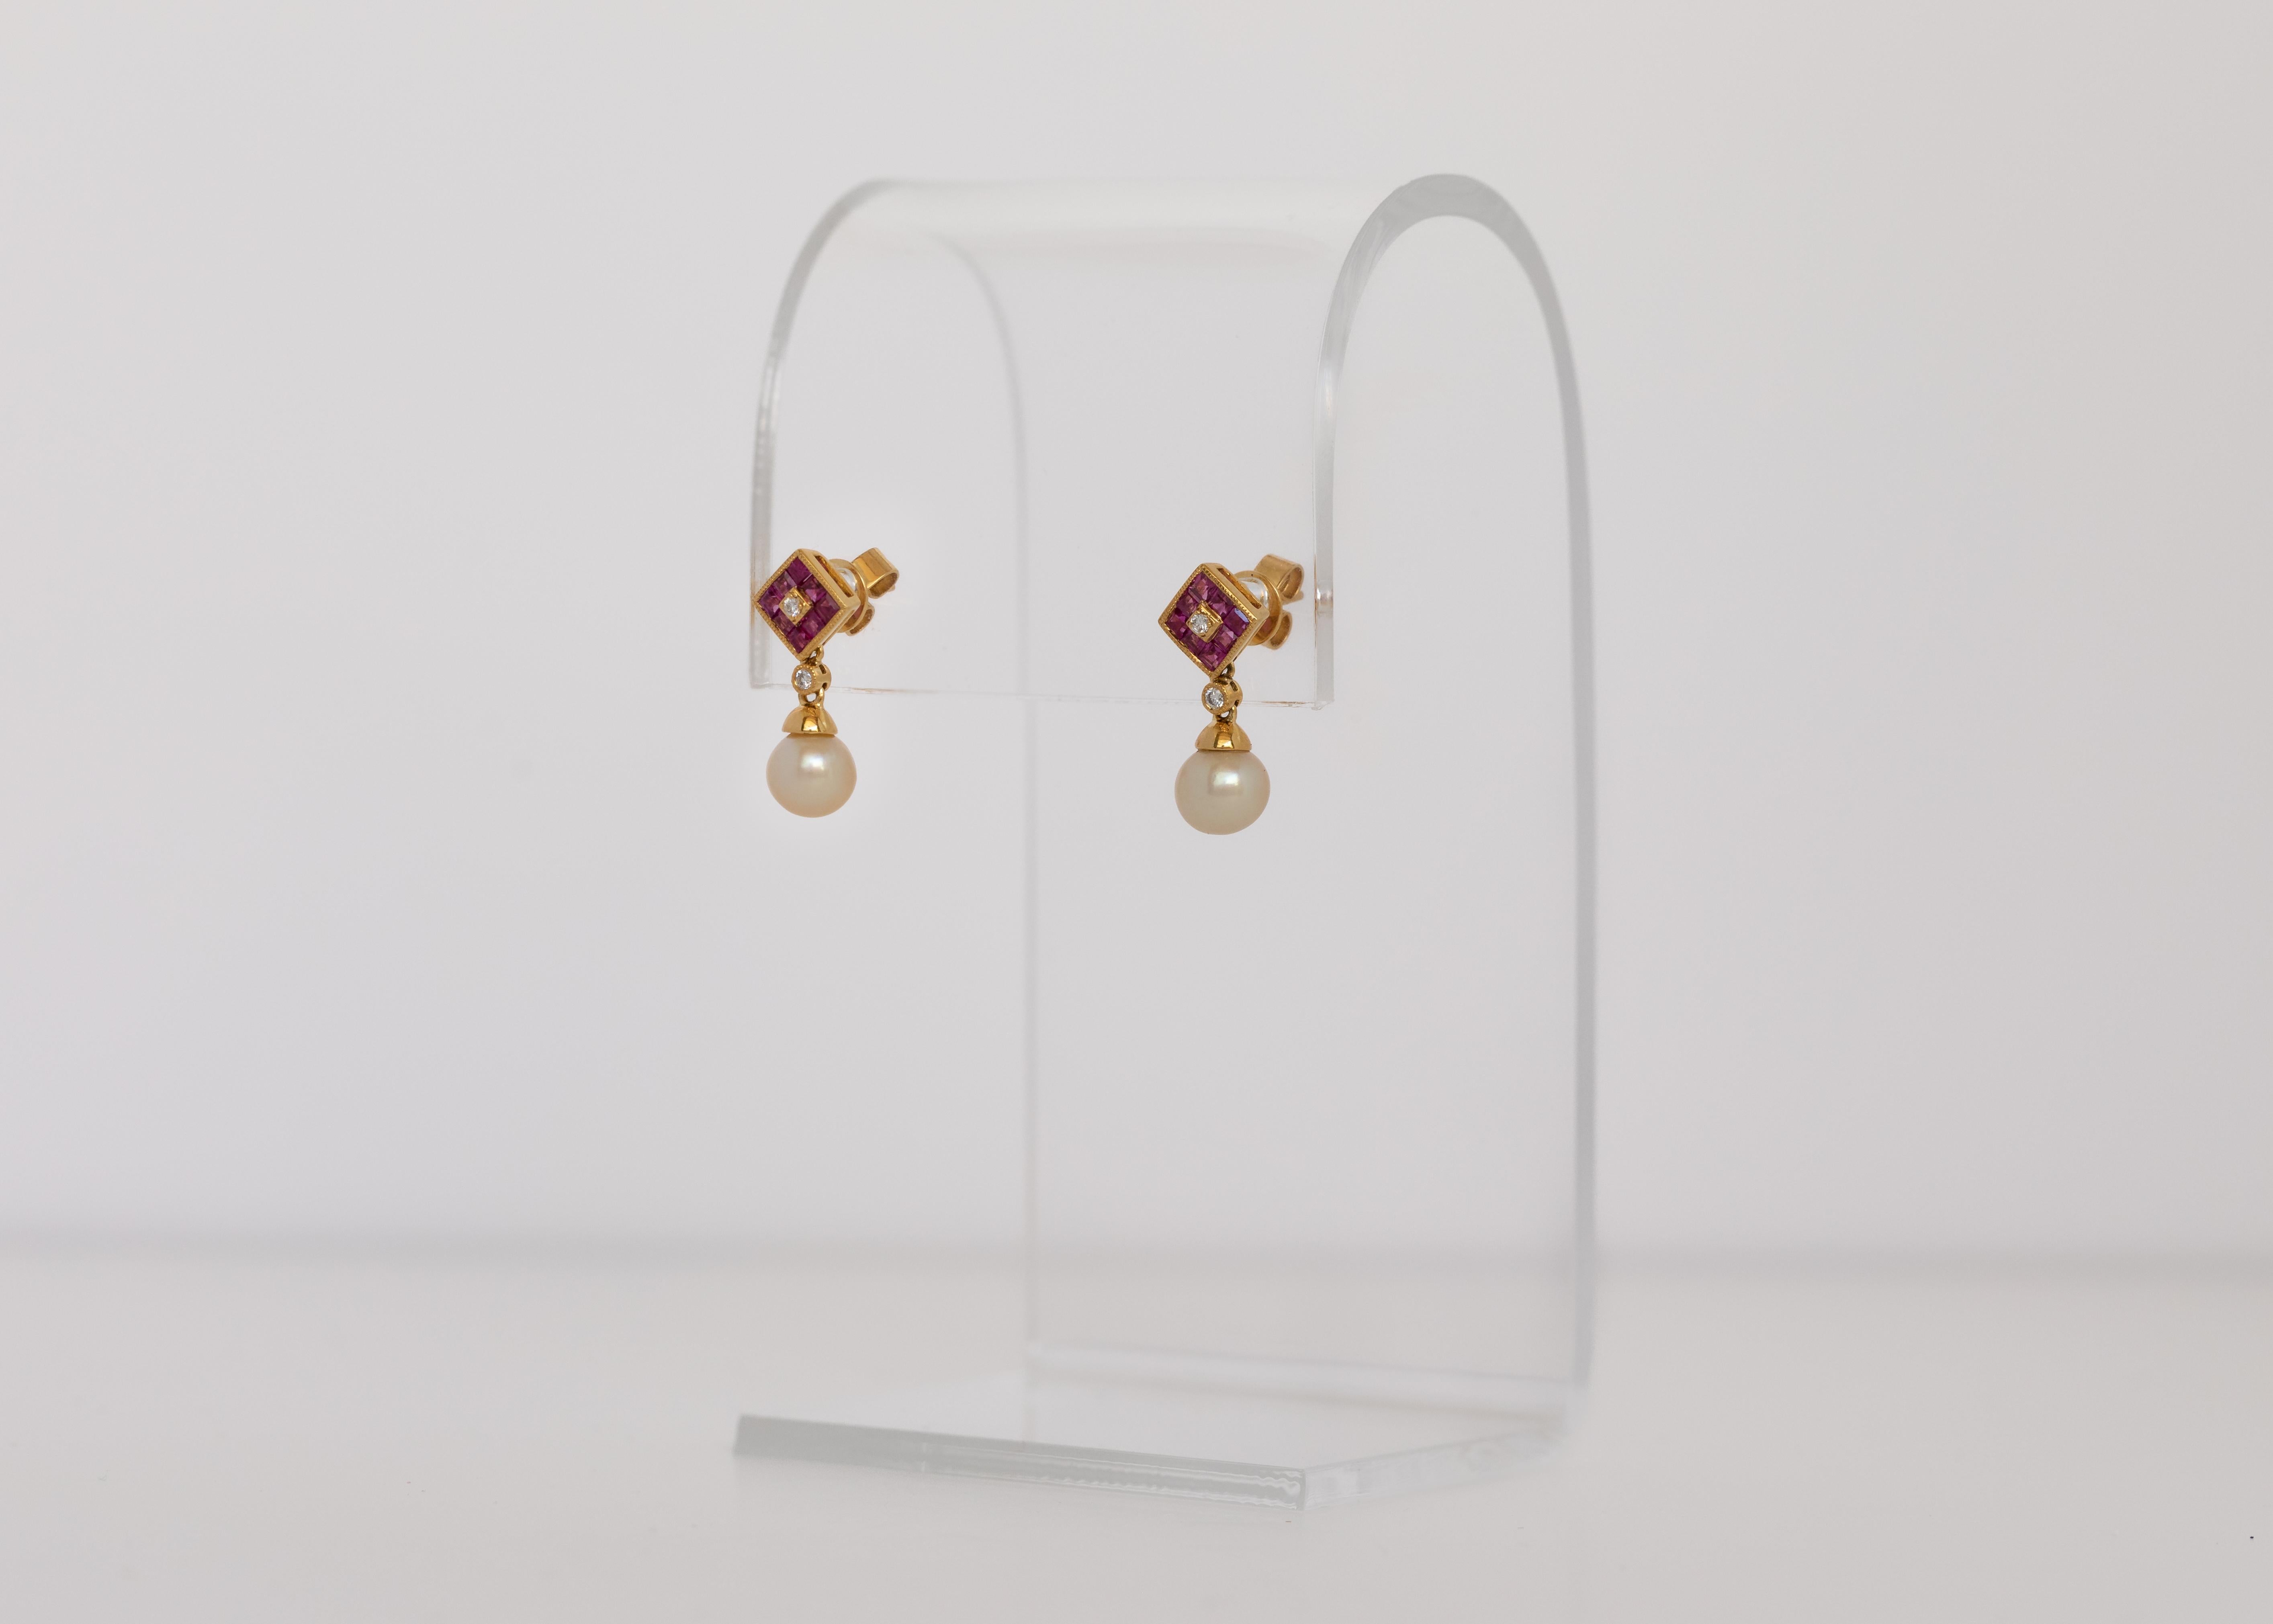 An every day wear, or for a special a occasion.

Those very high lustre, near round, certified natural Bahraini pearls hang from diamond shaped motifs studded in square cut rubies and round diamonds.

The earrings are in 18 karat yellow gold and are